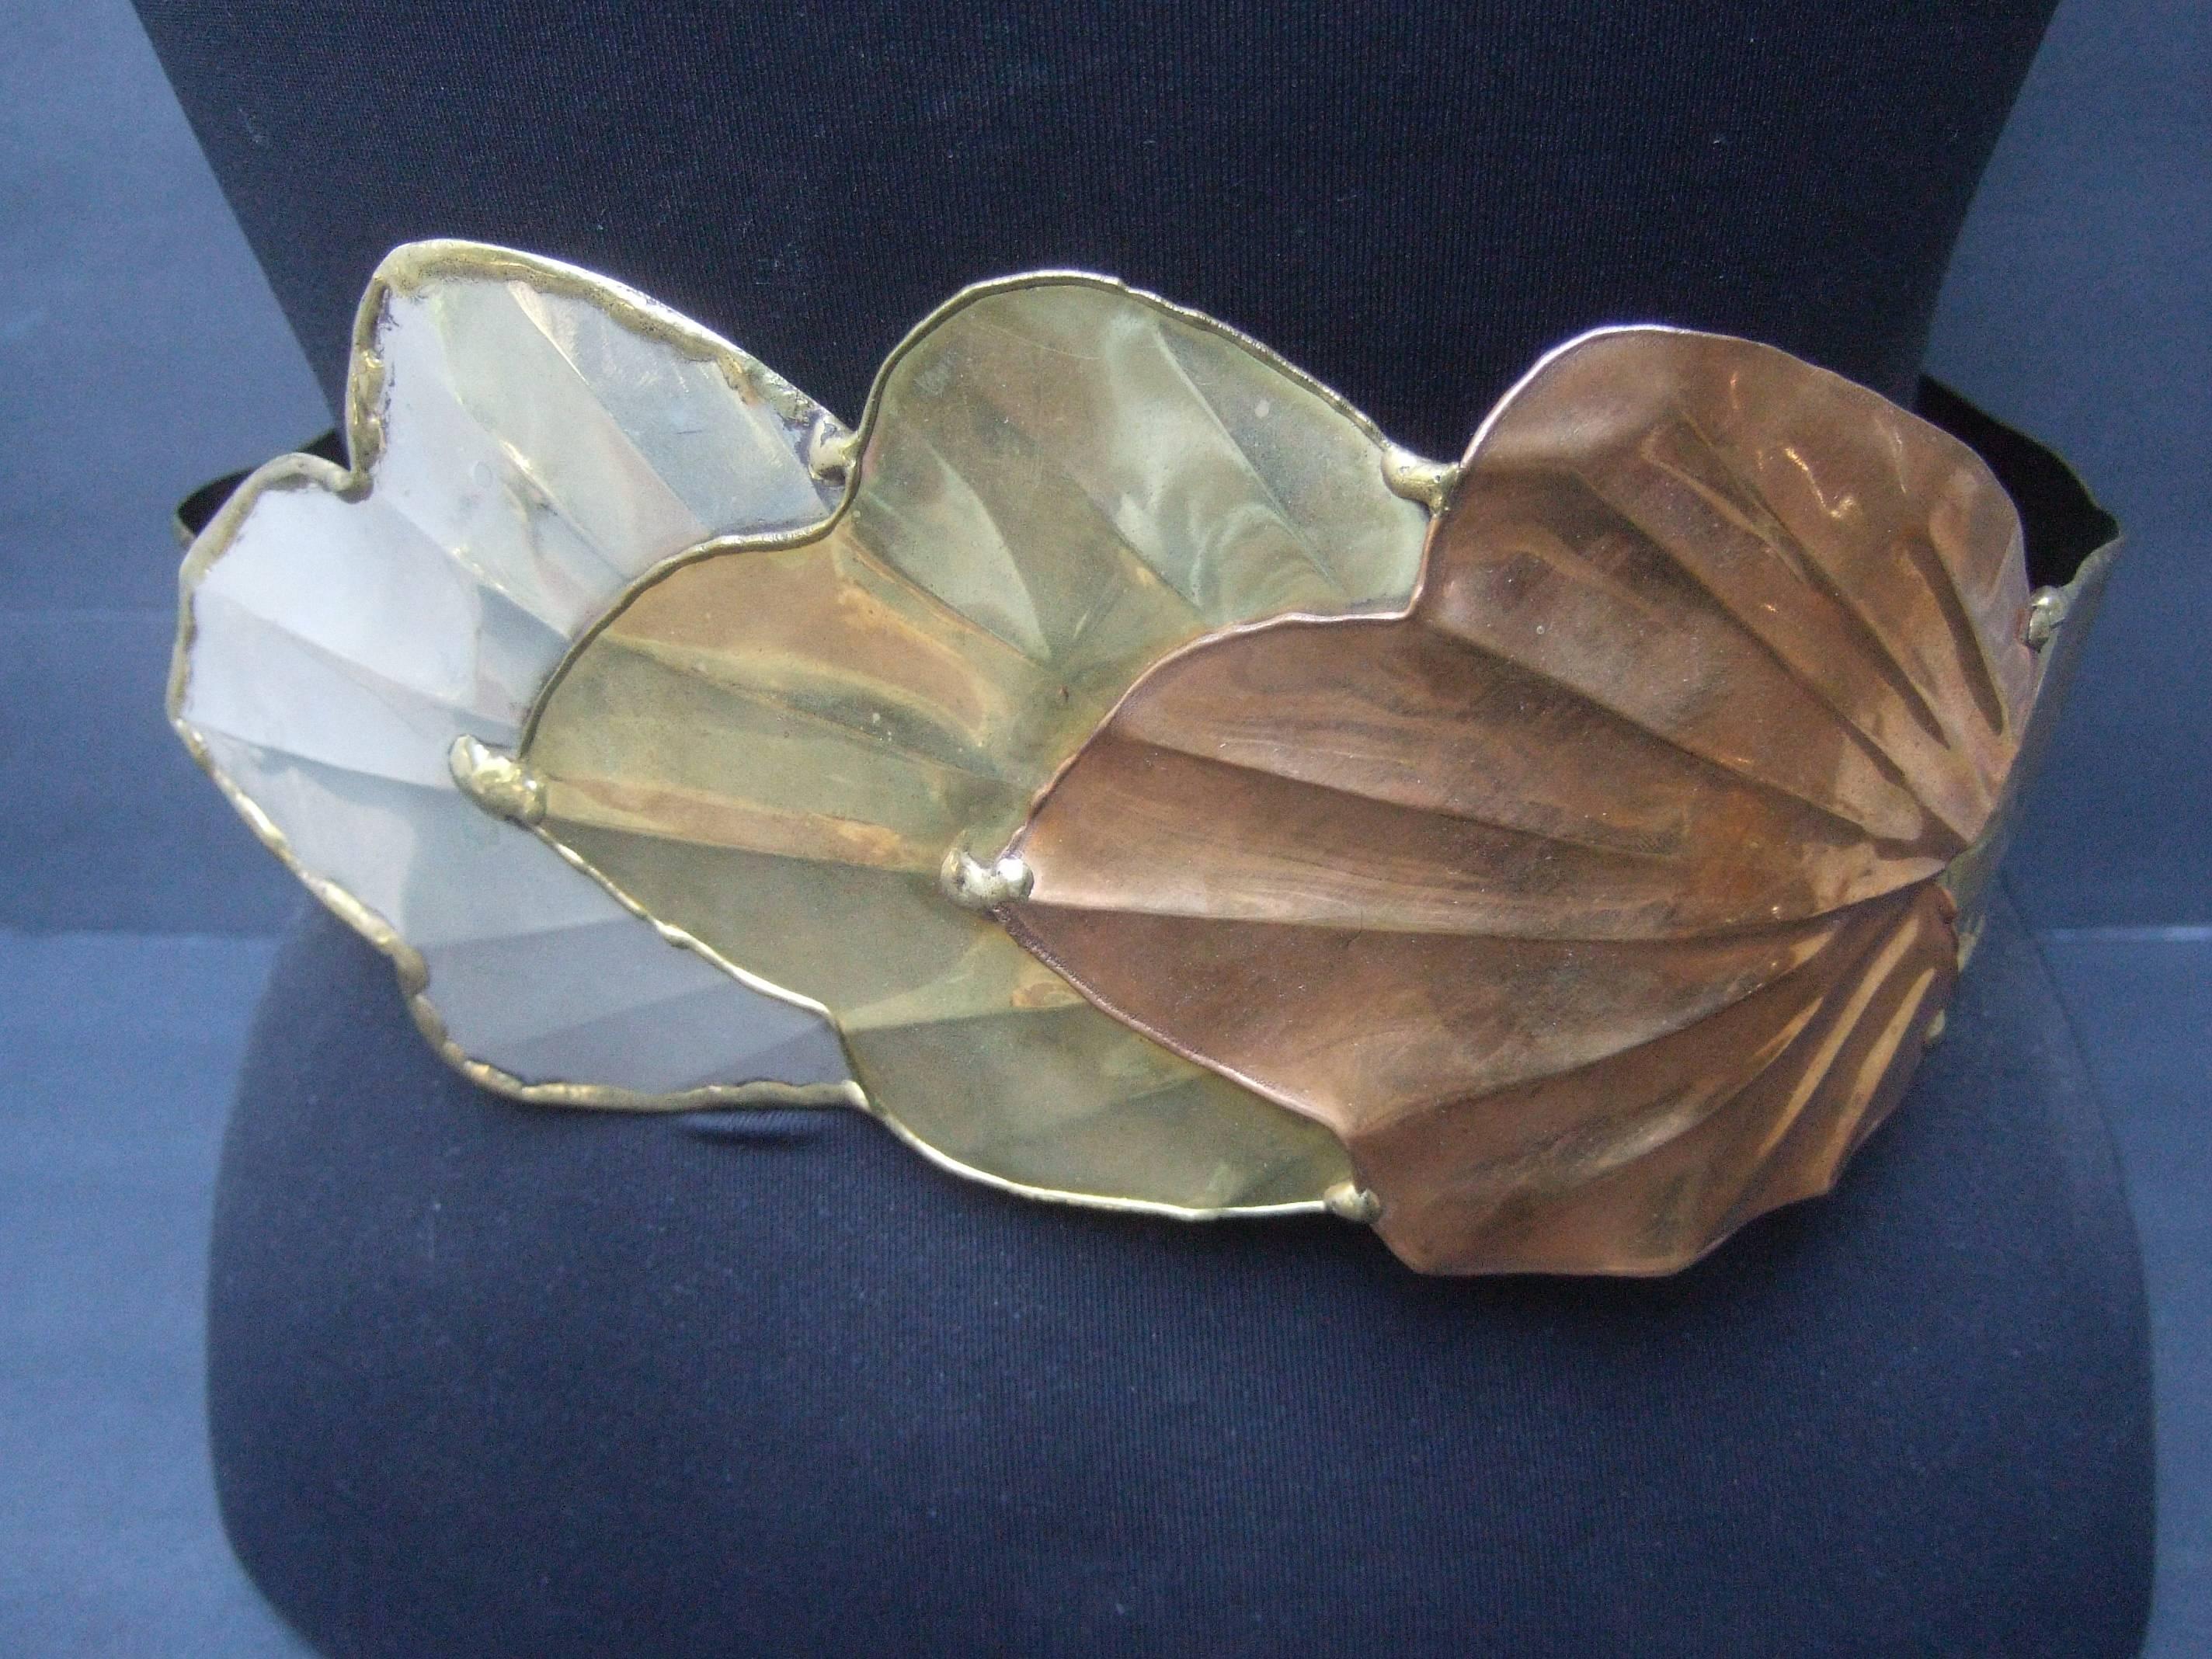 Massive avant-garde mixed metal leaf belt c 1980s
The artisan belt is designed with a trio
of huge scale mixed metal leaves 

The large scale leaves range from silver metal,
brass tone metal combined with a copper
metal leaf

The trio of